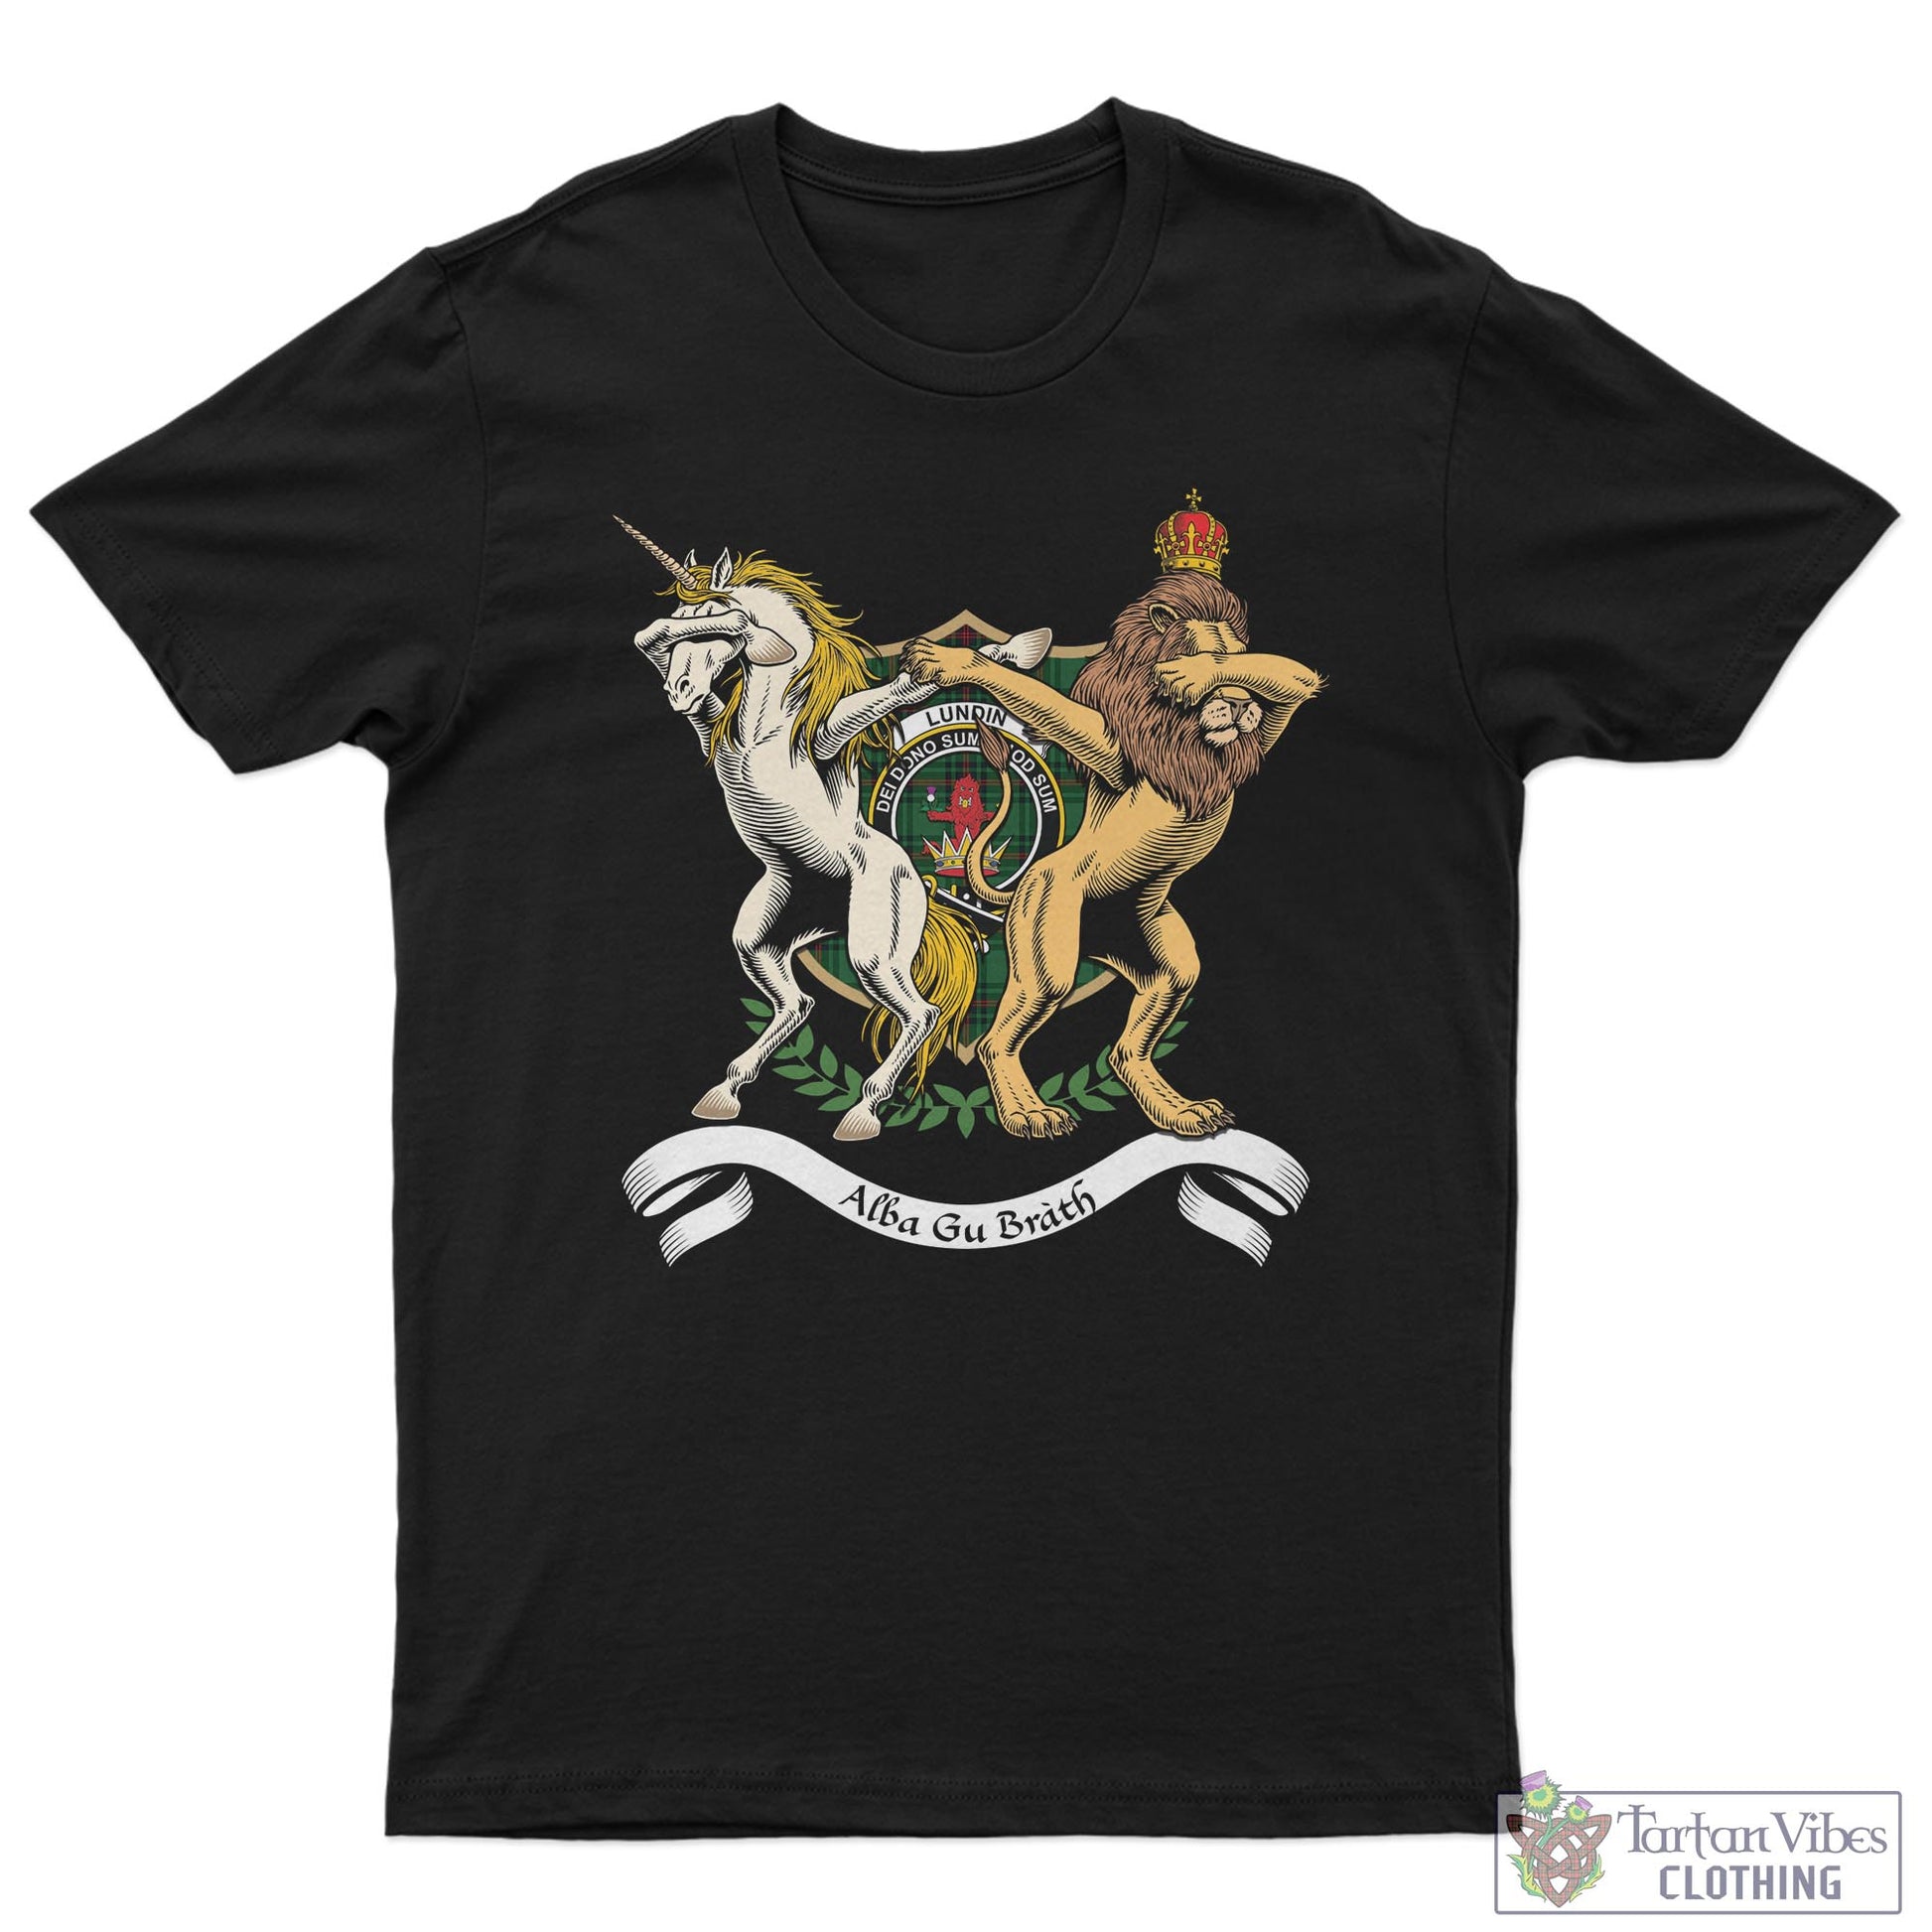 Tartan Vibes Clothing Lundin Family Crest Cotton Men's T-Shirt with Scotland Royal Coat Of Arm Funny Style